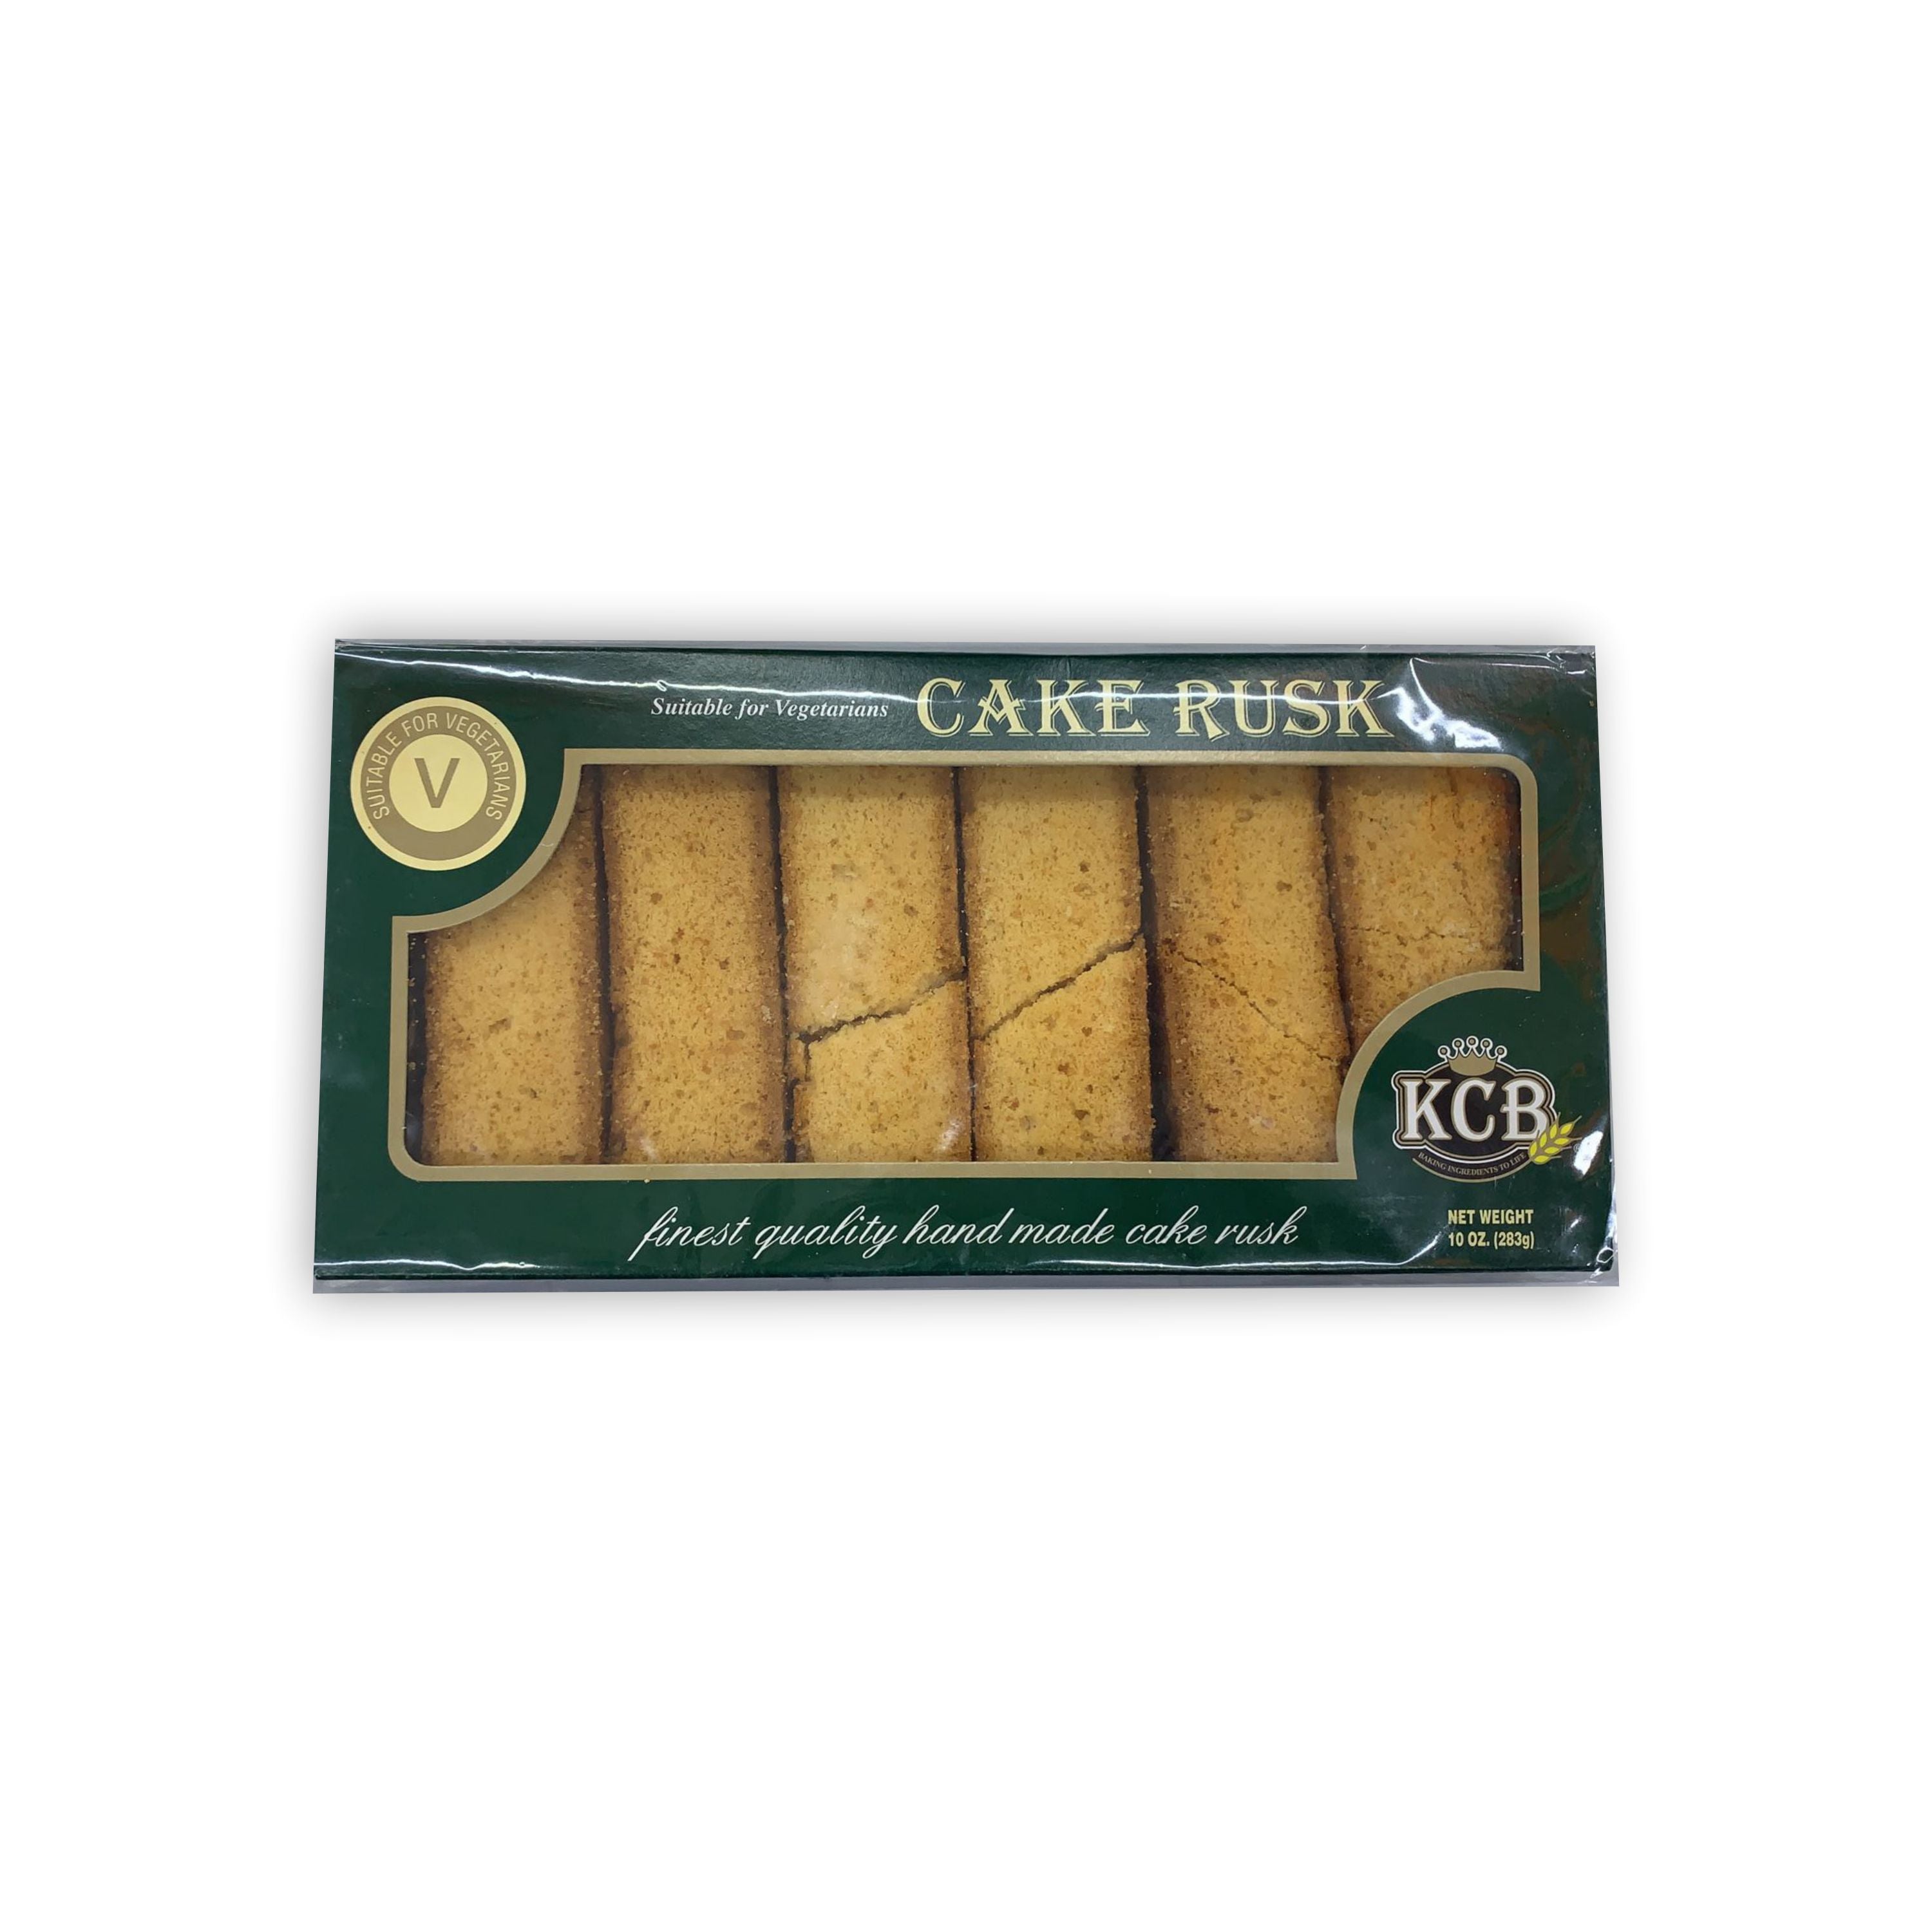 Kcb Coconut Cake Rusk 700gm - Subhlaxmi Grocers